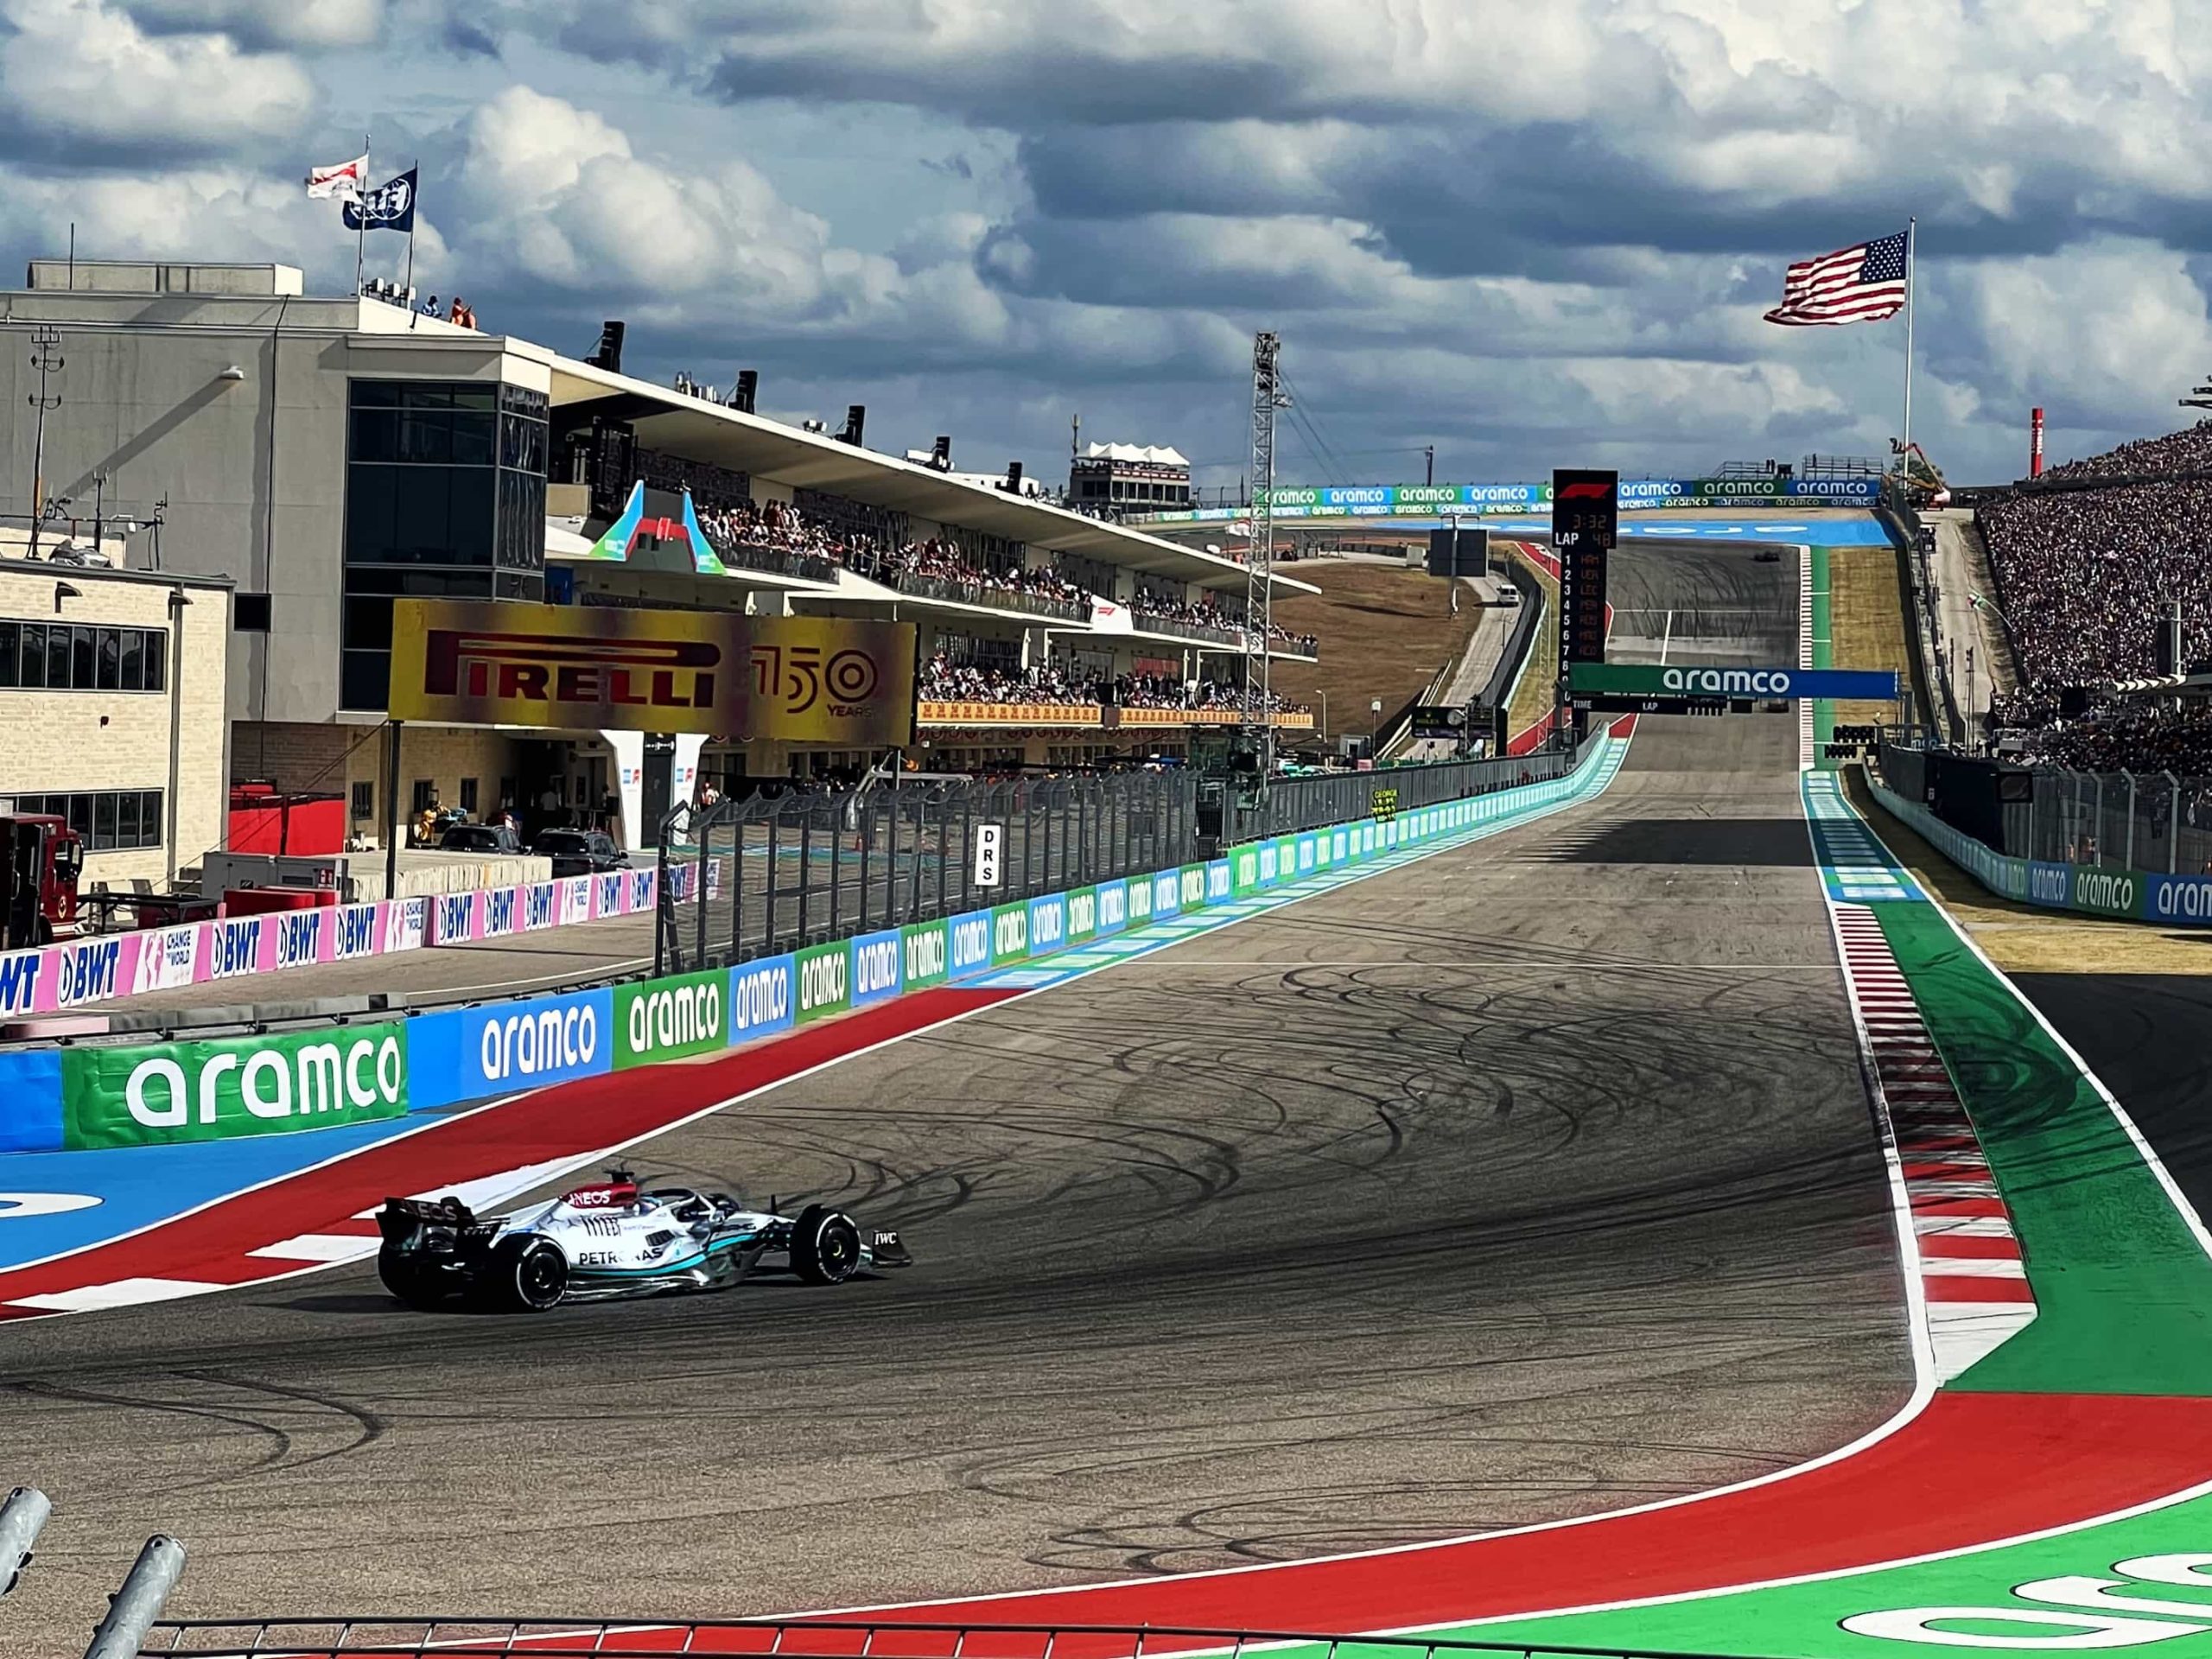 A view up the main straight at COTA, with Lewis Hamilton's F1 car exiting the final corner